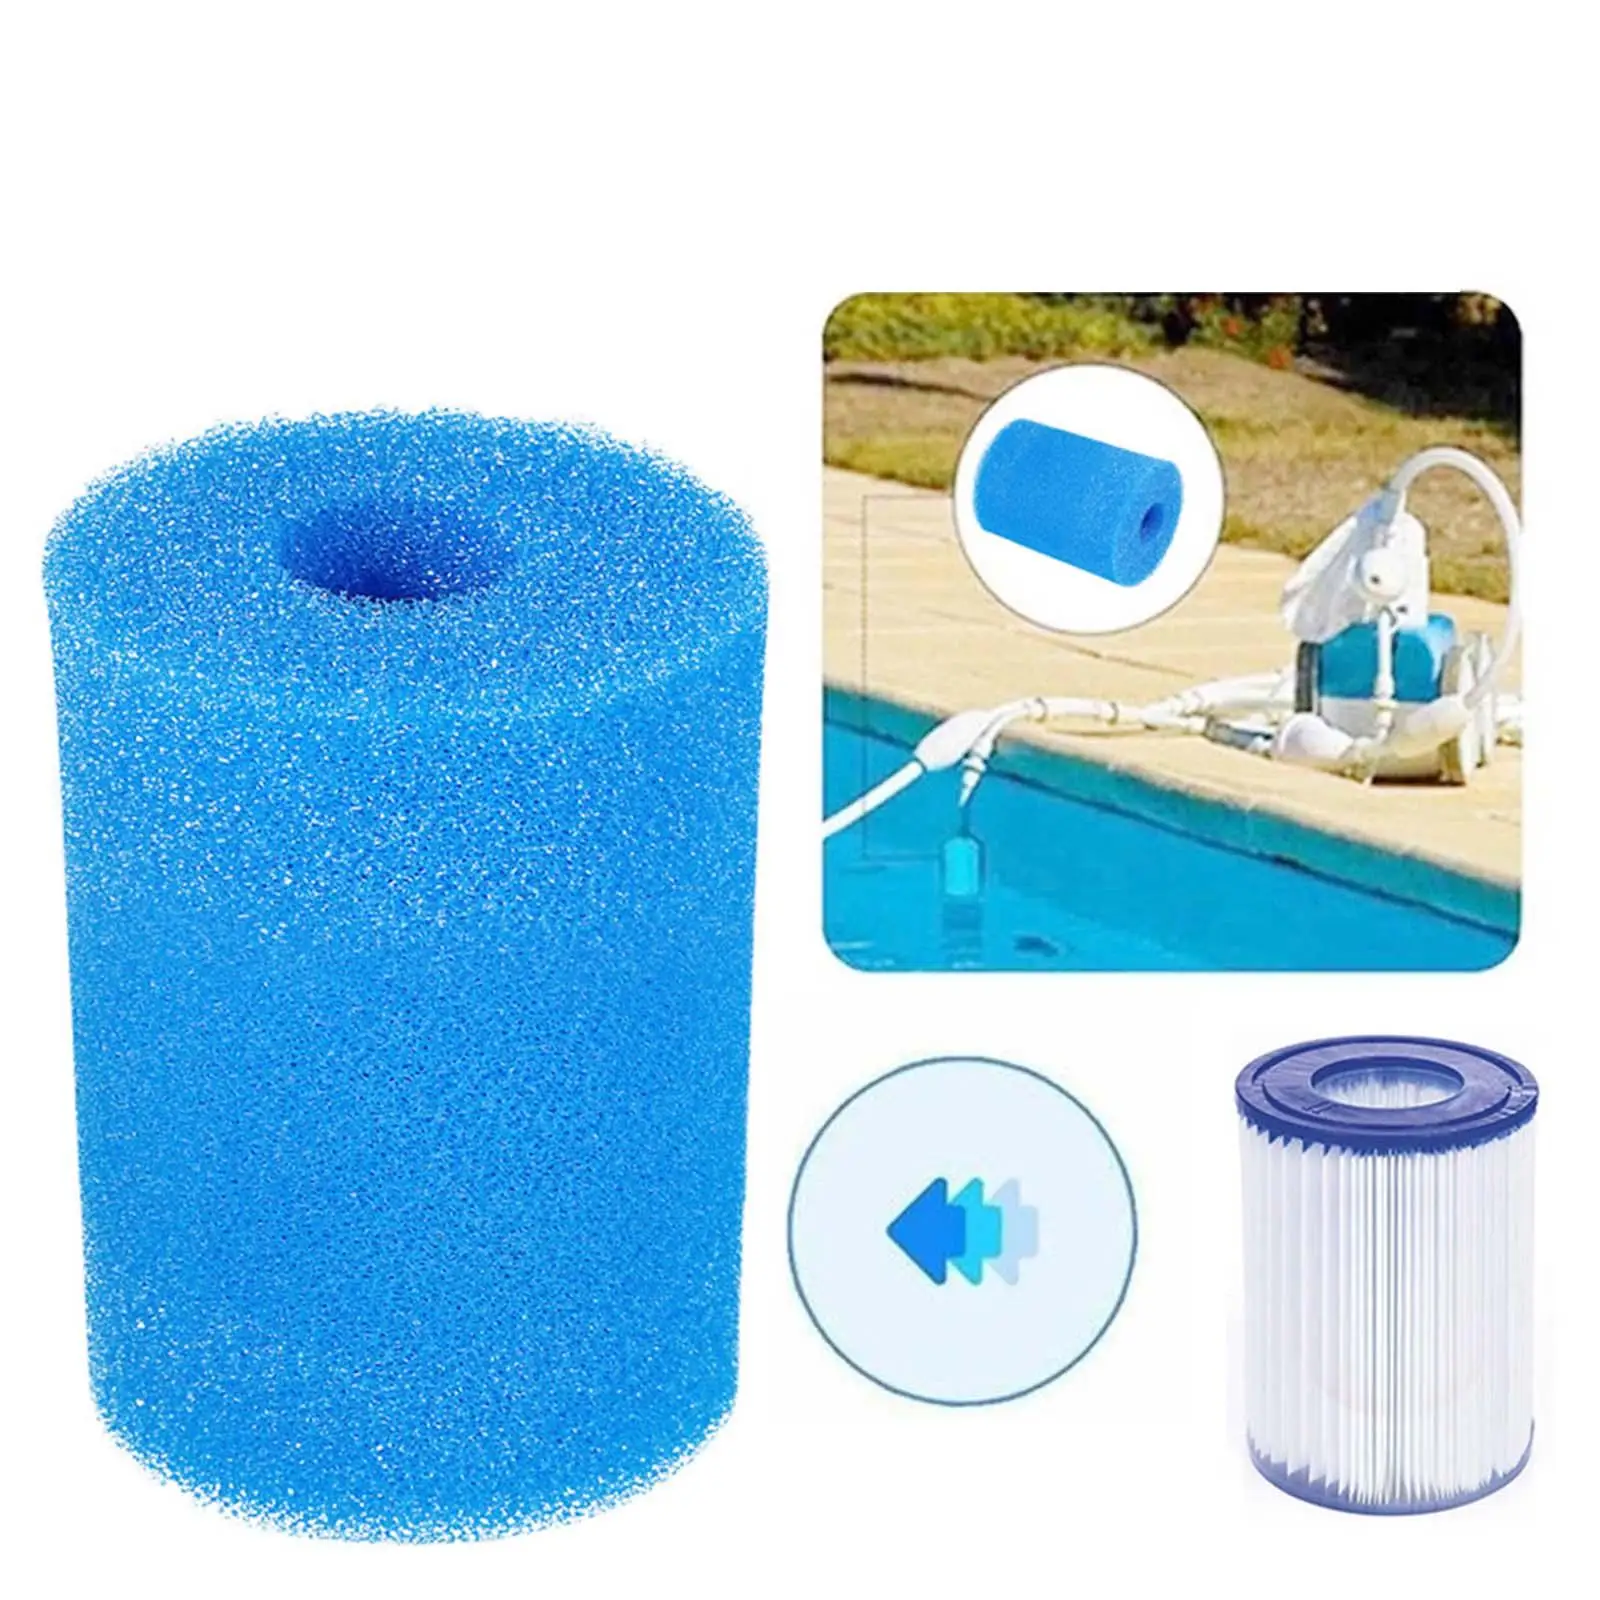 Pool Filter Sponge Reusable Pool Cleaner Foam for Type II Swimming Summer above Ground Swimming Pool Accessory